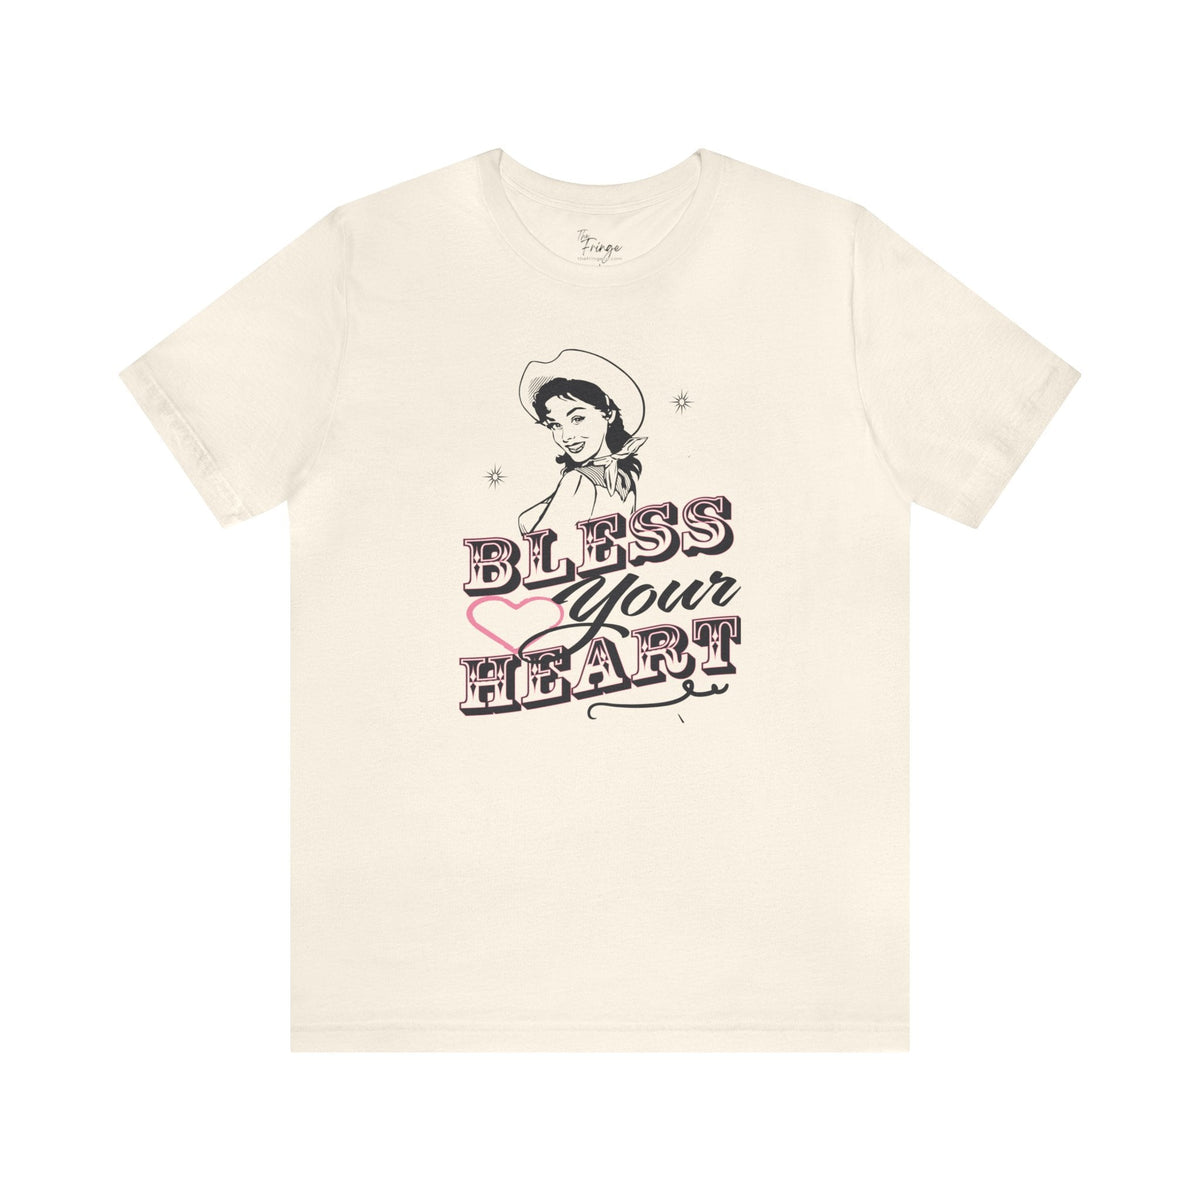 Bless Your Heart Graphic Tee | Women's Country Graphic Tee T-Shirt TheFringeCultureCollective